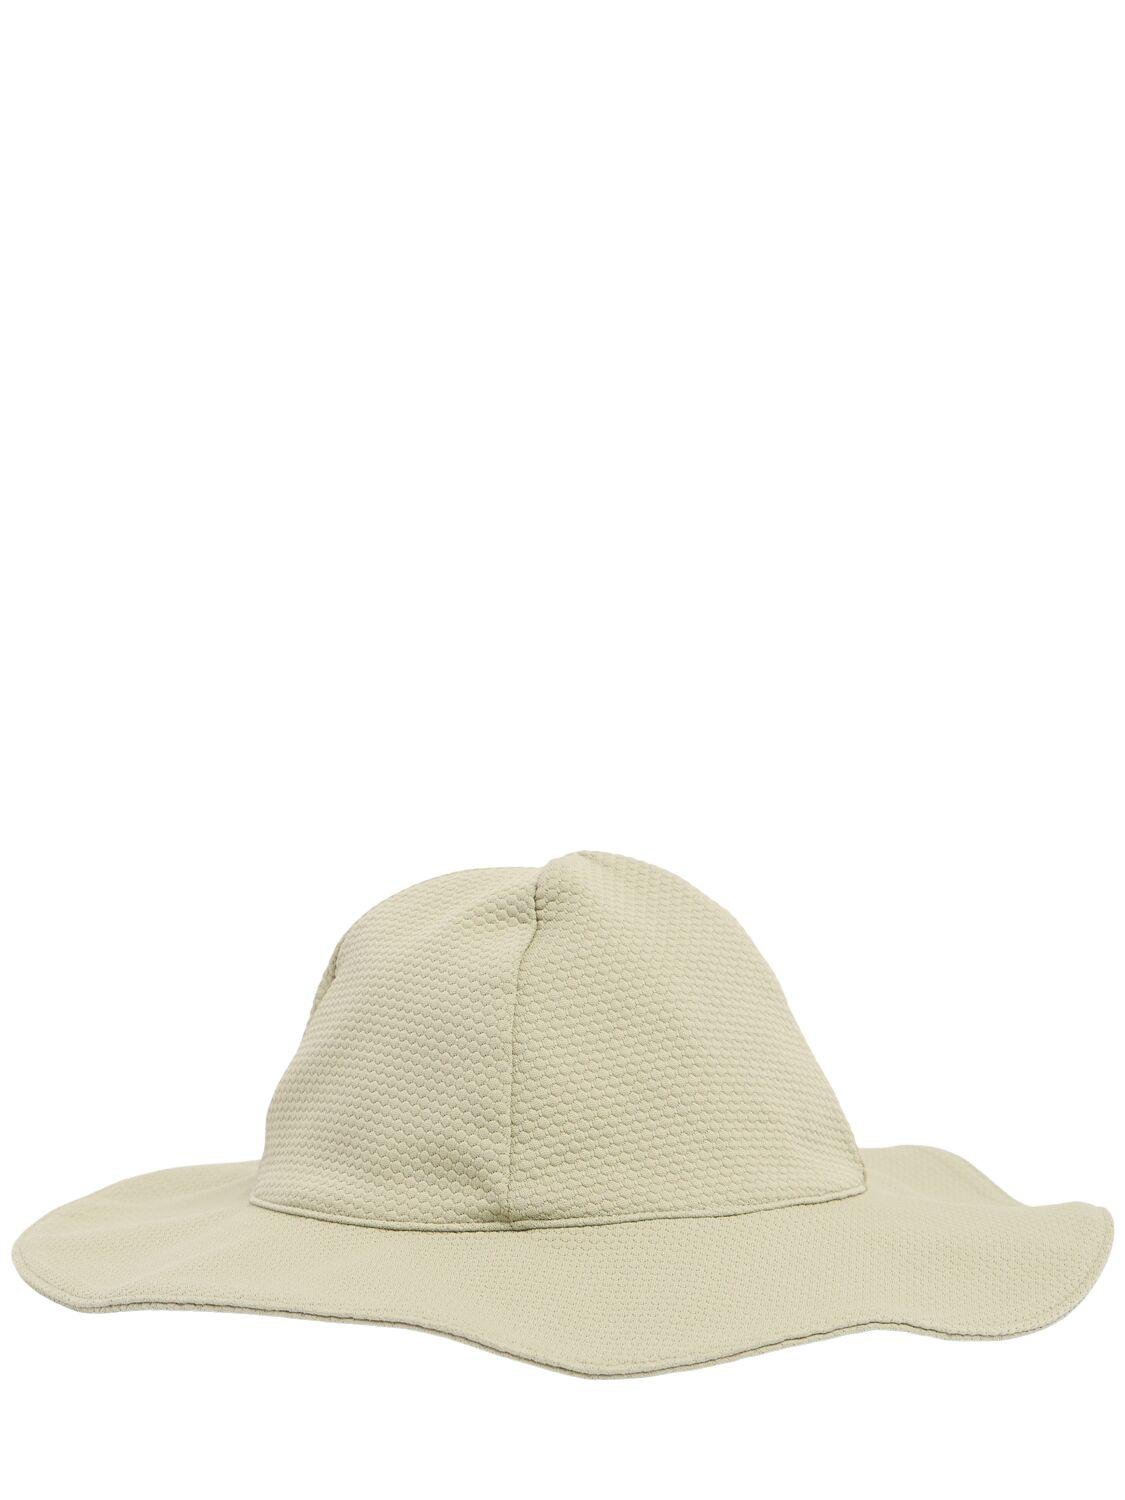 Recycled Nylon Bucket Hat by QUINCY MAE